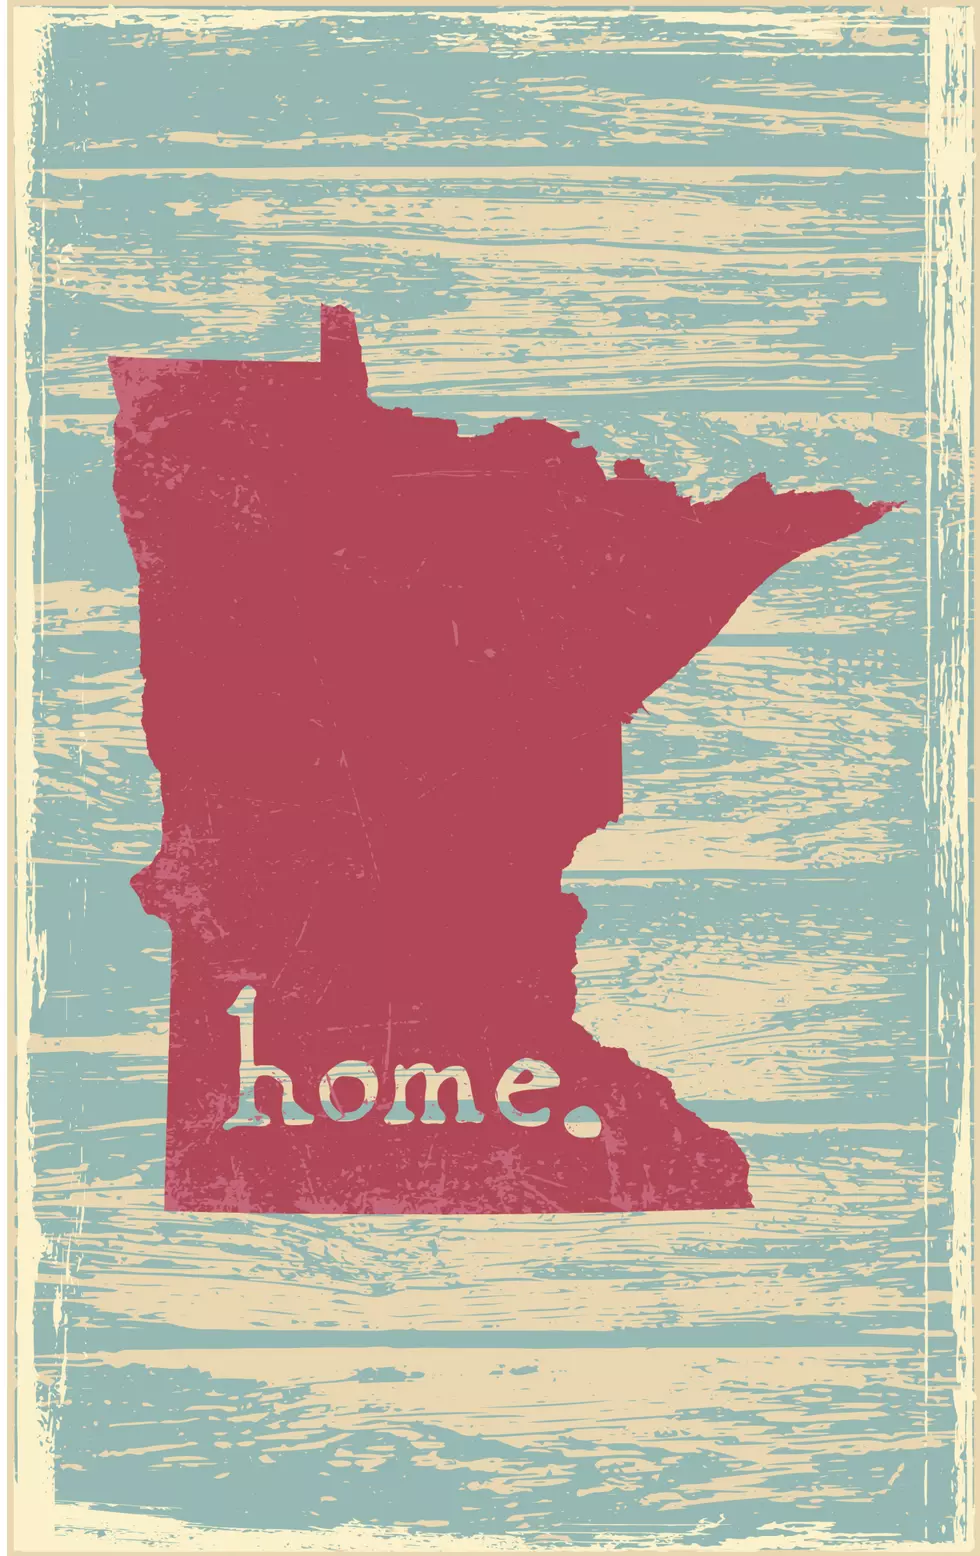 How Did Minnesota Become The Gopher State?